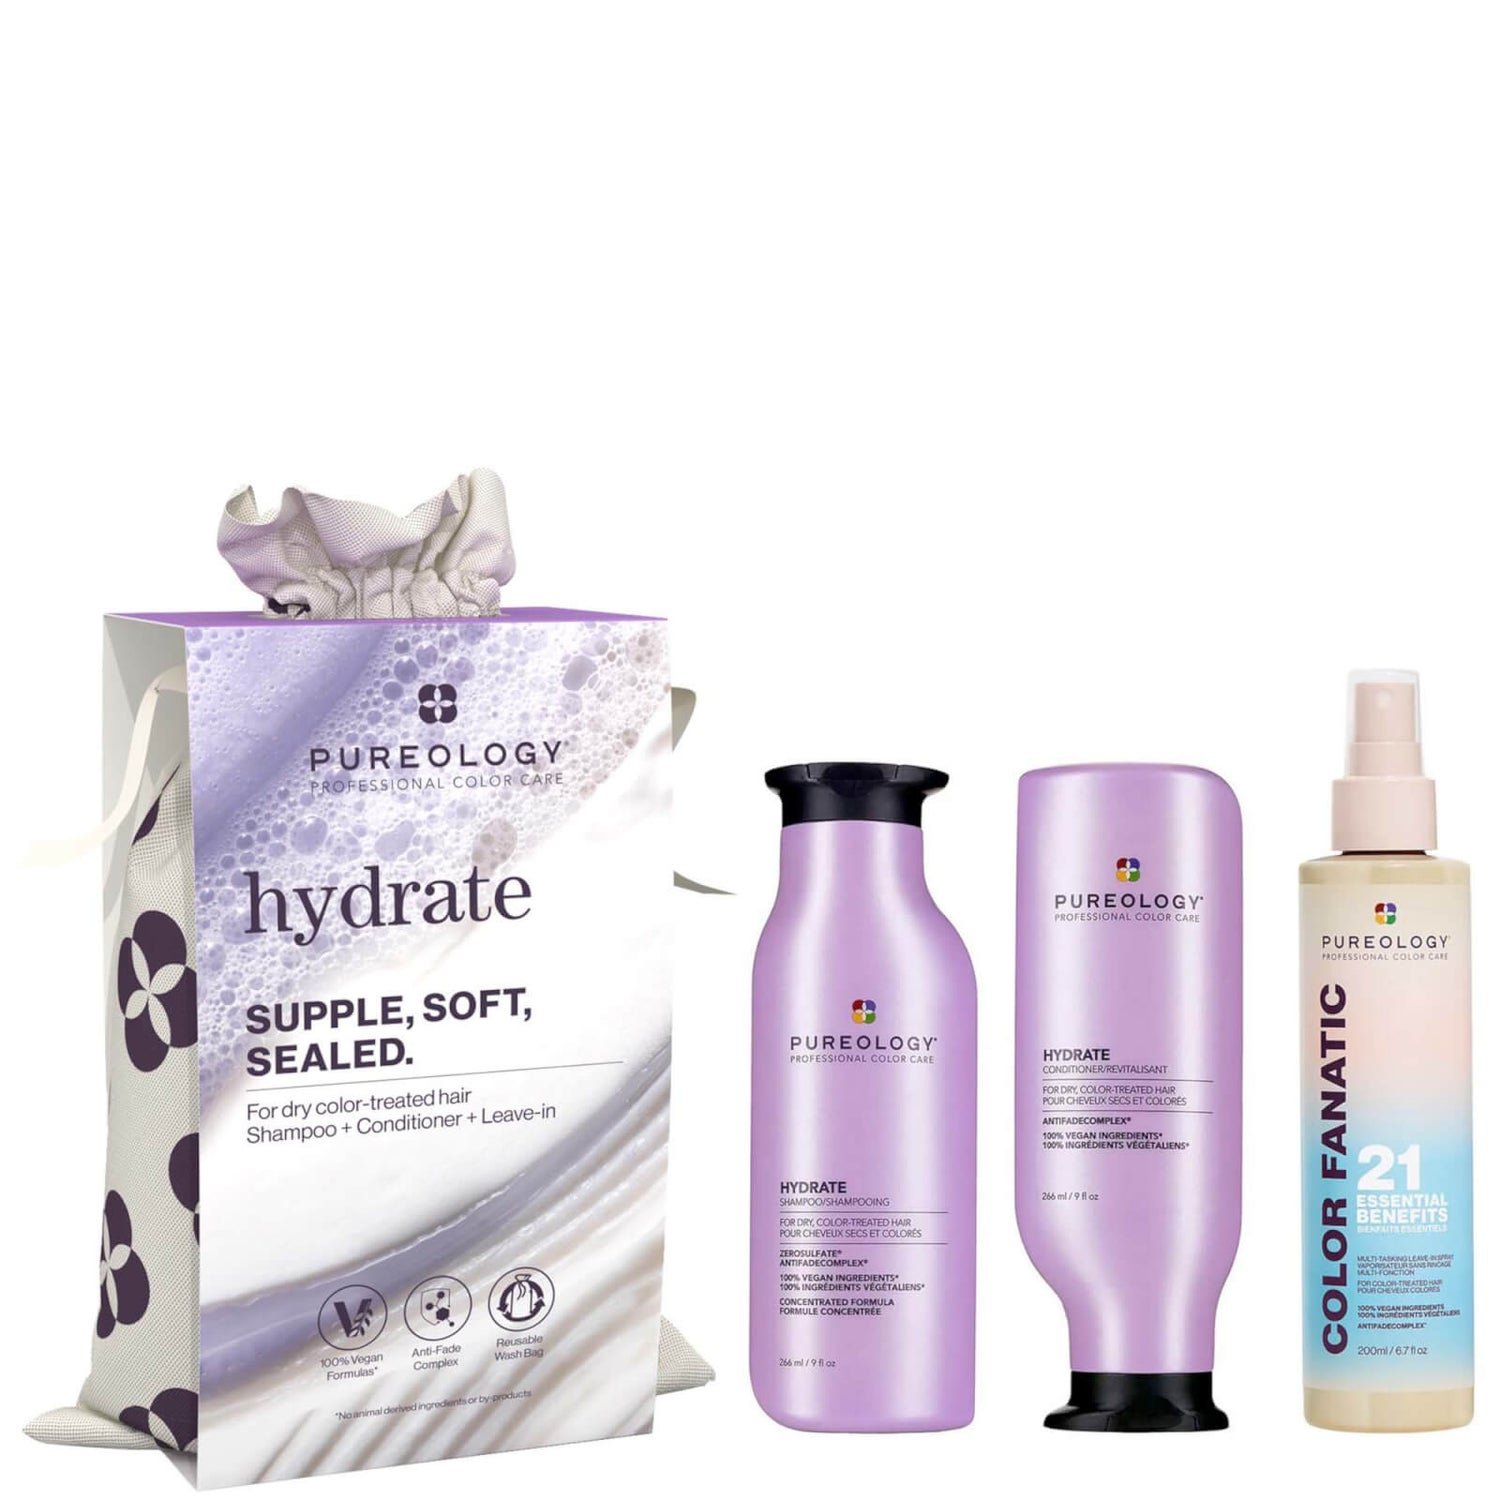 Pureology Hydrate Shampoo Conditioner and Color Fanatic Hair Gift Set for Dry Hair (Worth £81.70)